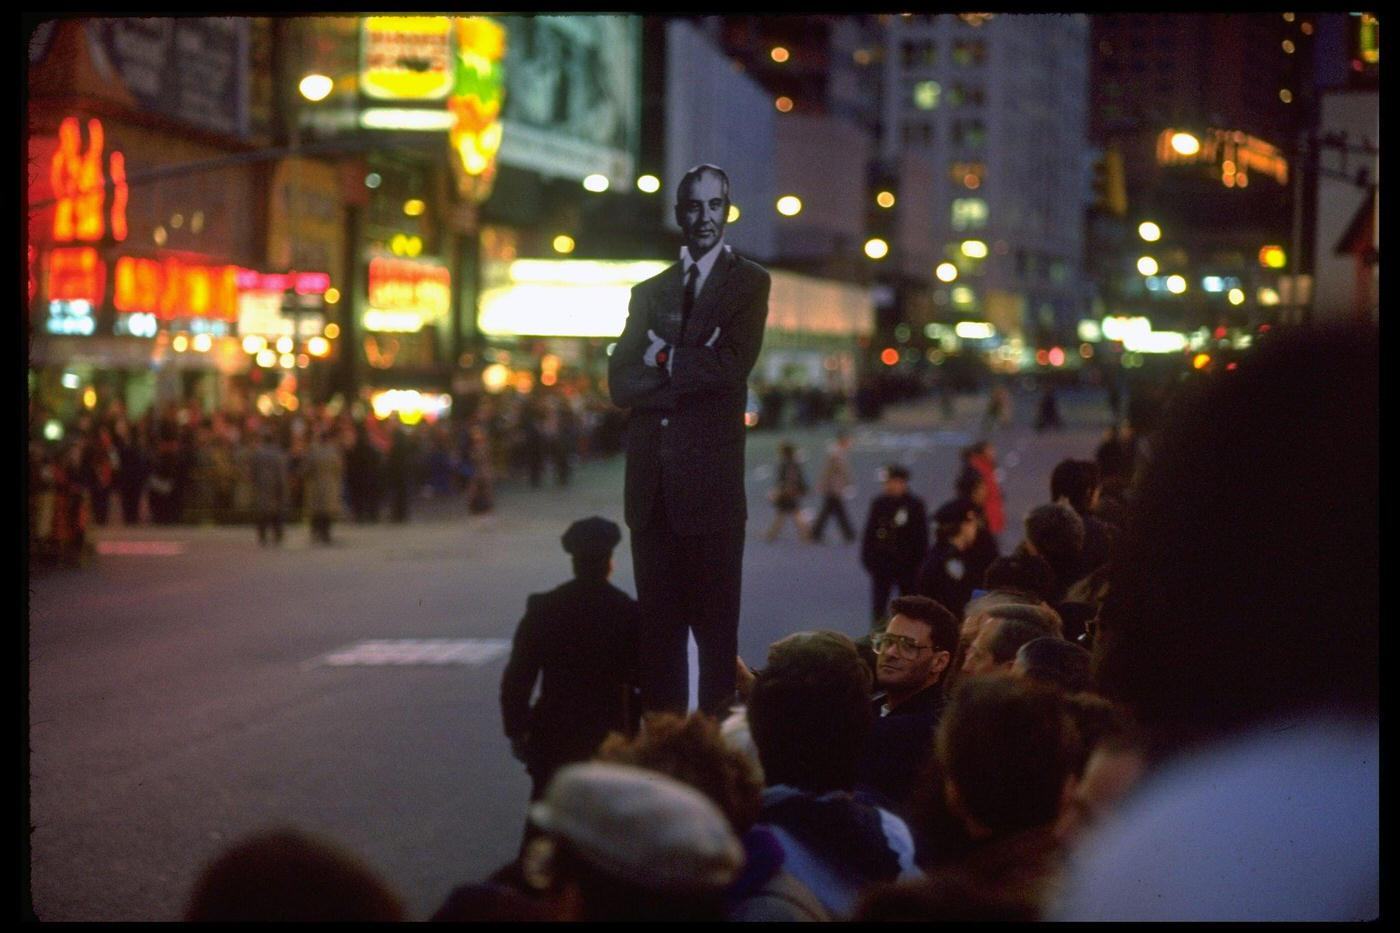 Cardboard Cutout Of Soviet Leader Gorbachev In Times Square, Awaiting His Arrival, Manhattan